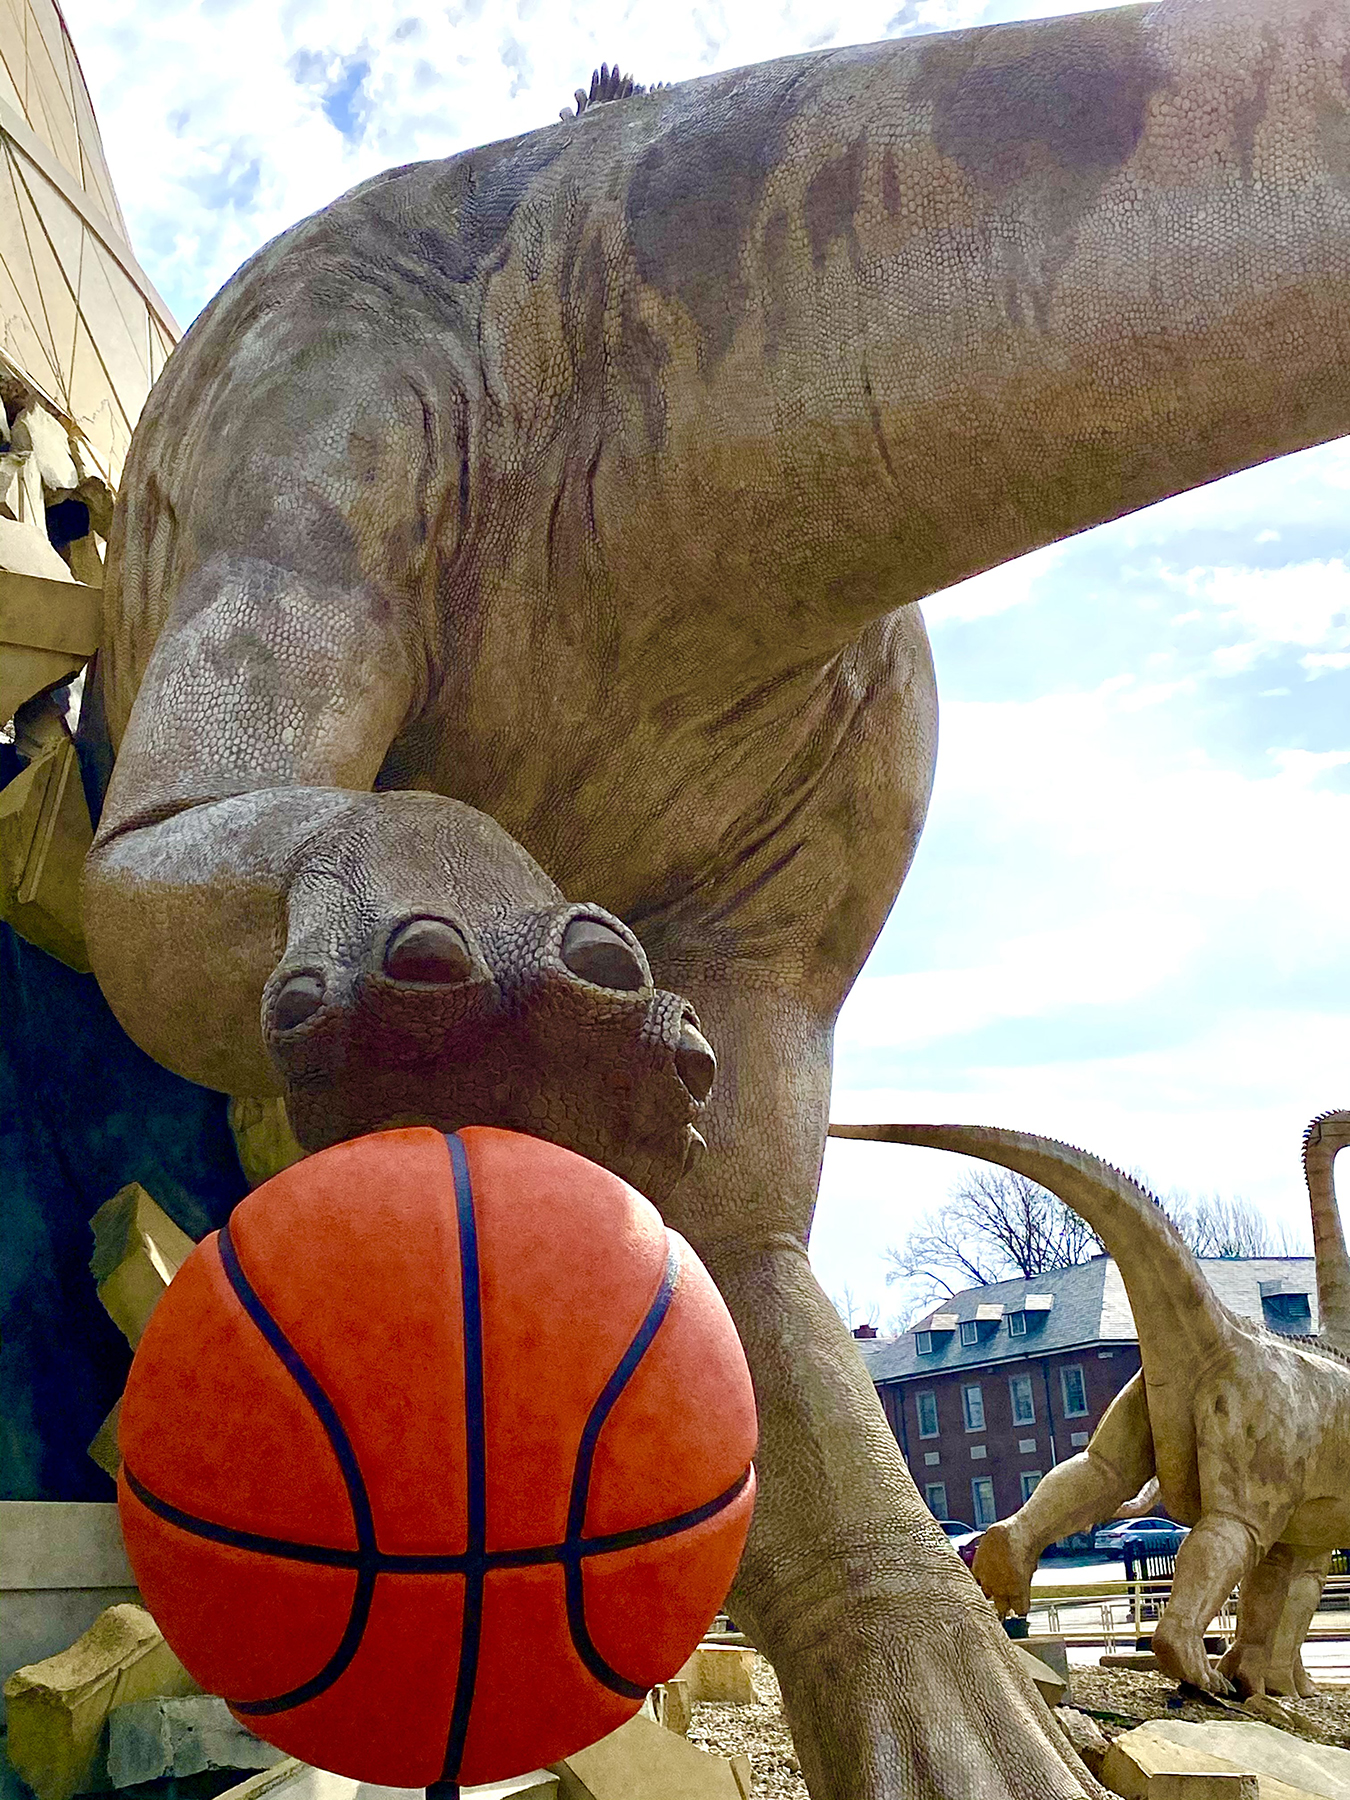 Basketball is so huge in Indianapolis that the dinosaurs are breaking out of buildings to hoop it up!